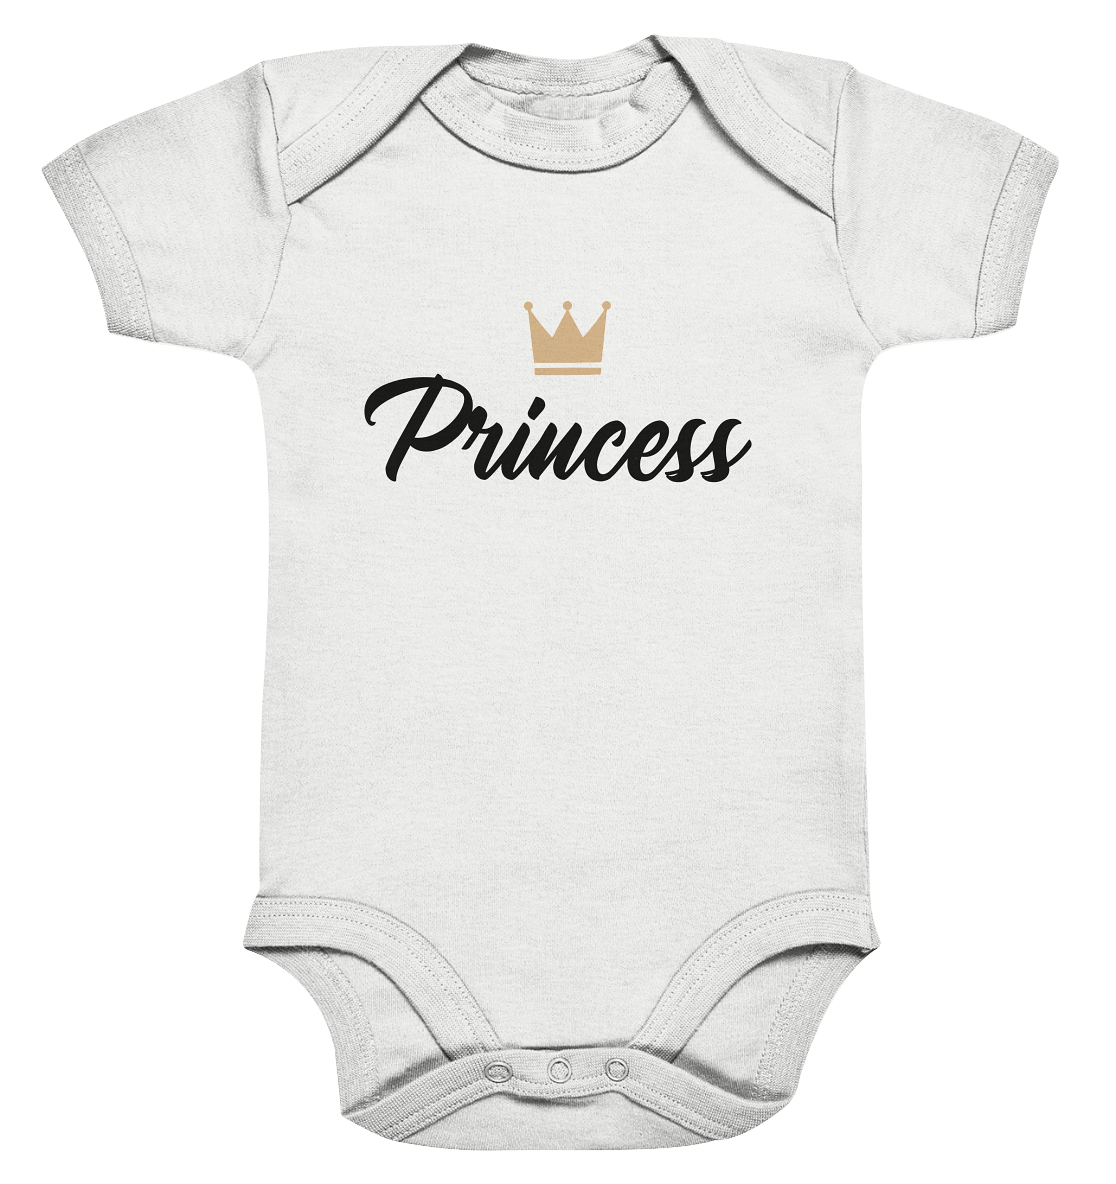 Princess Baby Bodysuite Familienoutfit King, Queen und Princess Bloominic